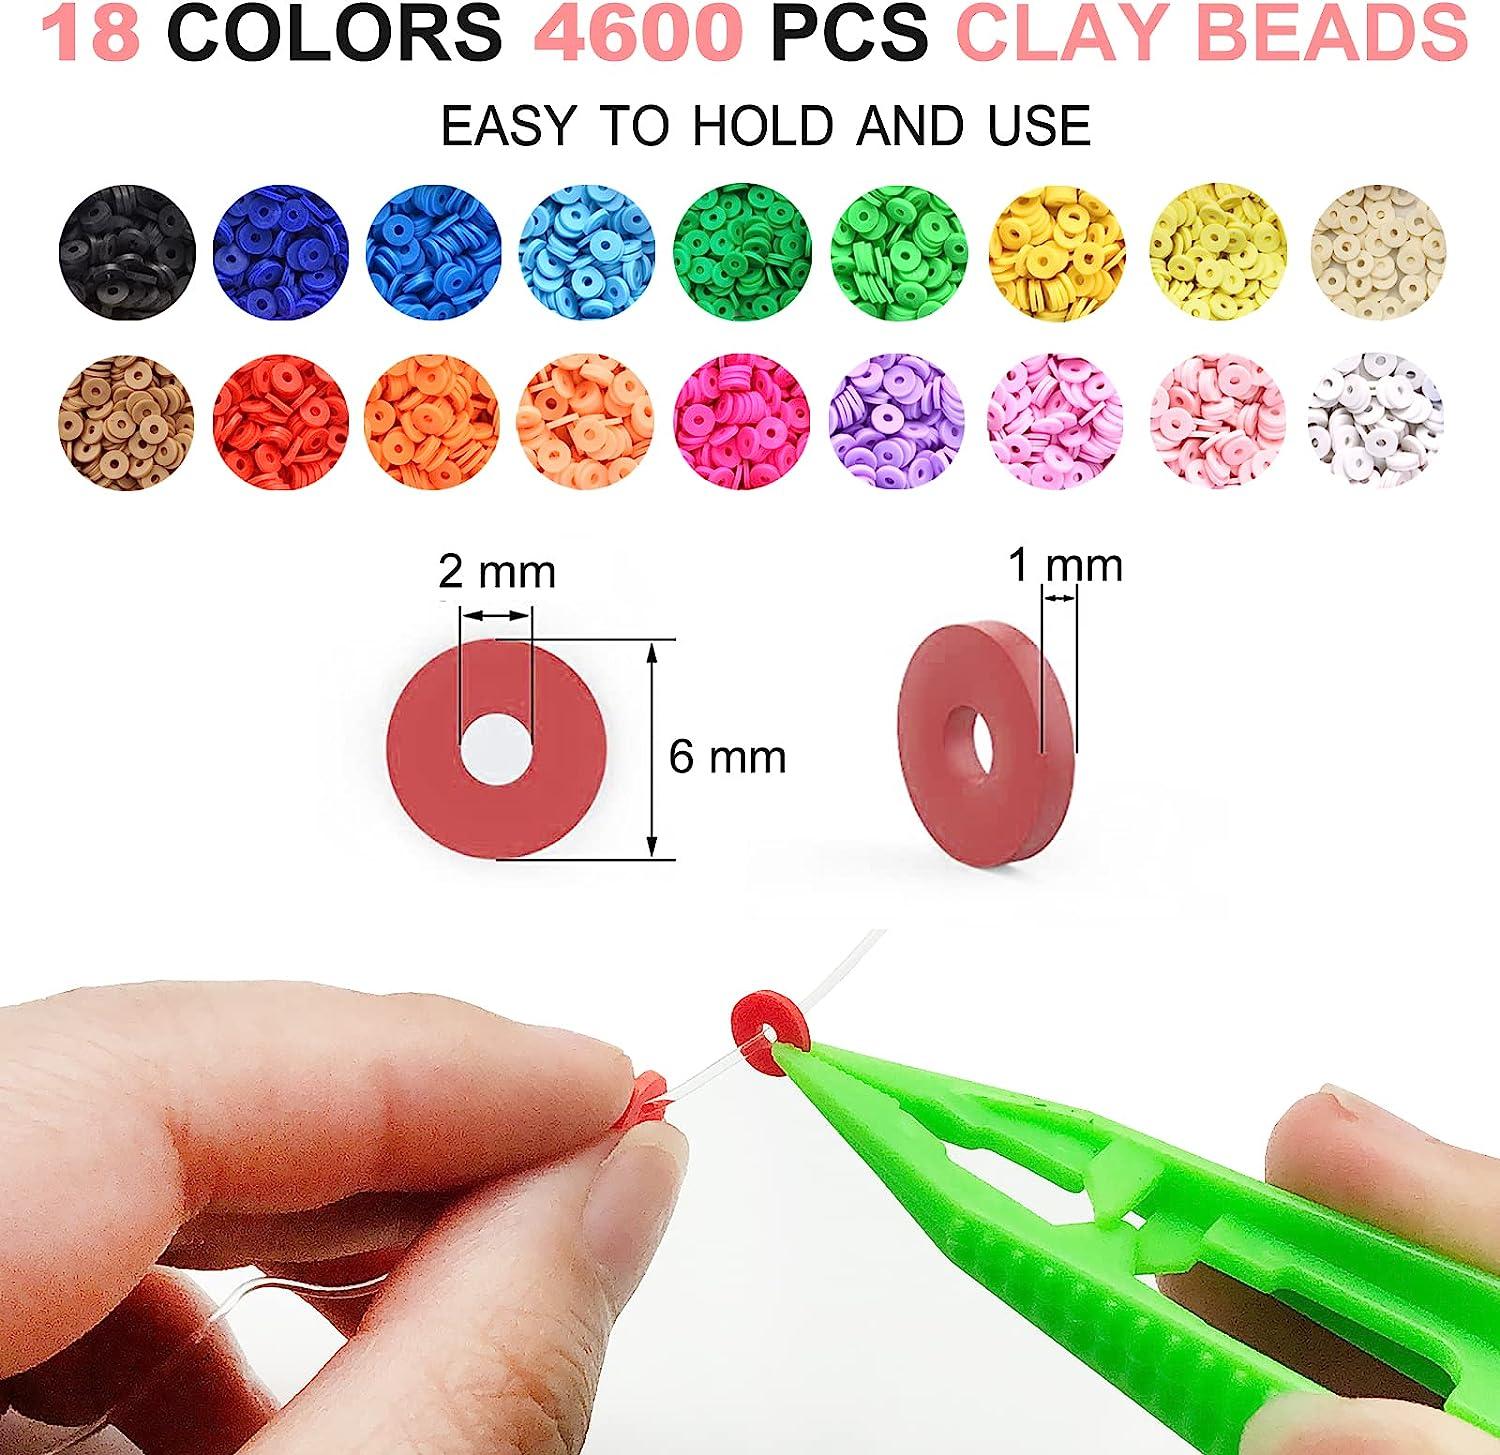 Gionlion 6000 Pcs Clay Beads for Bracelet Making, 24 Colors Flat Preppy  Beads for Friendship Bracelet Kit, Polymer Clay Heishi Beads with Charms  for